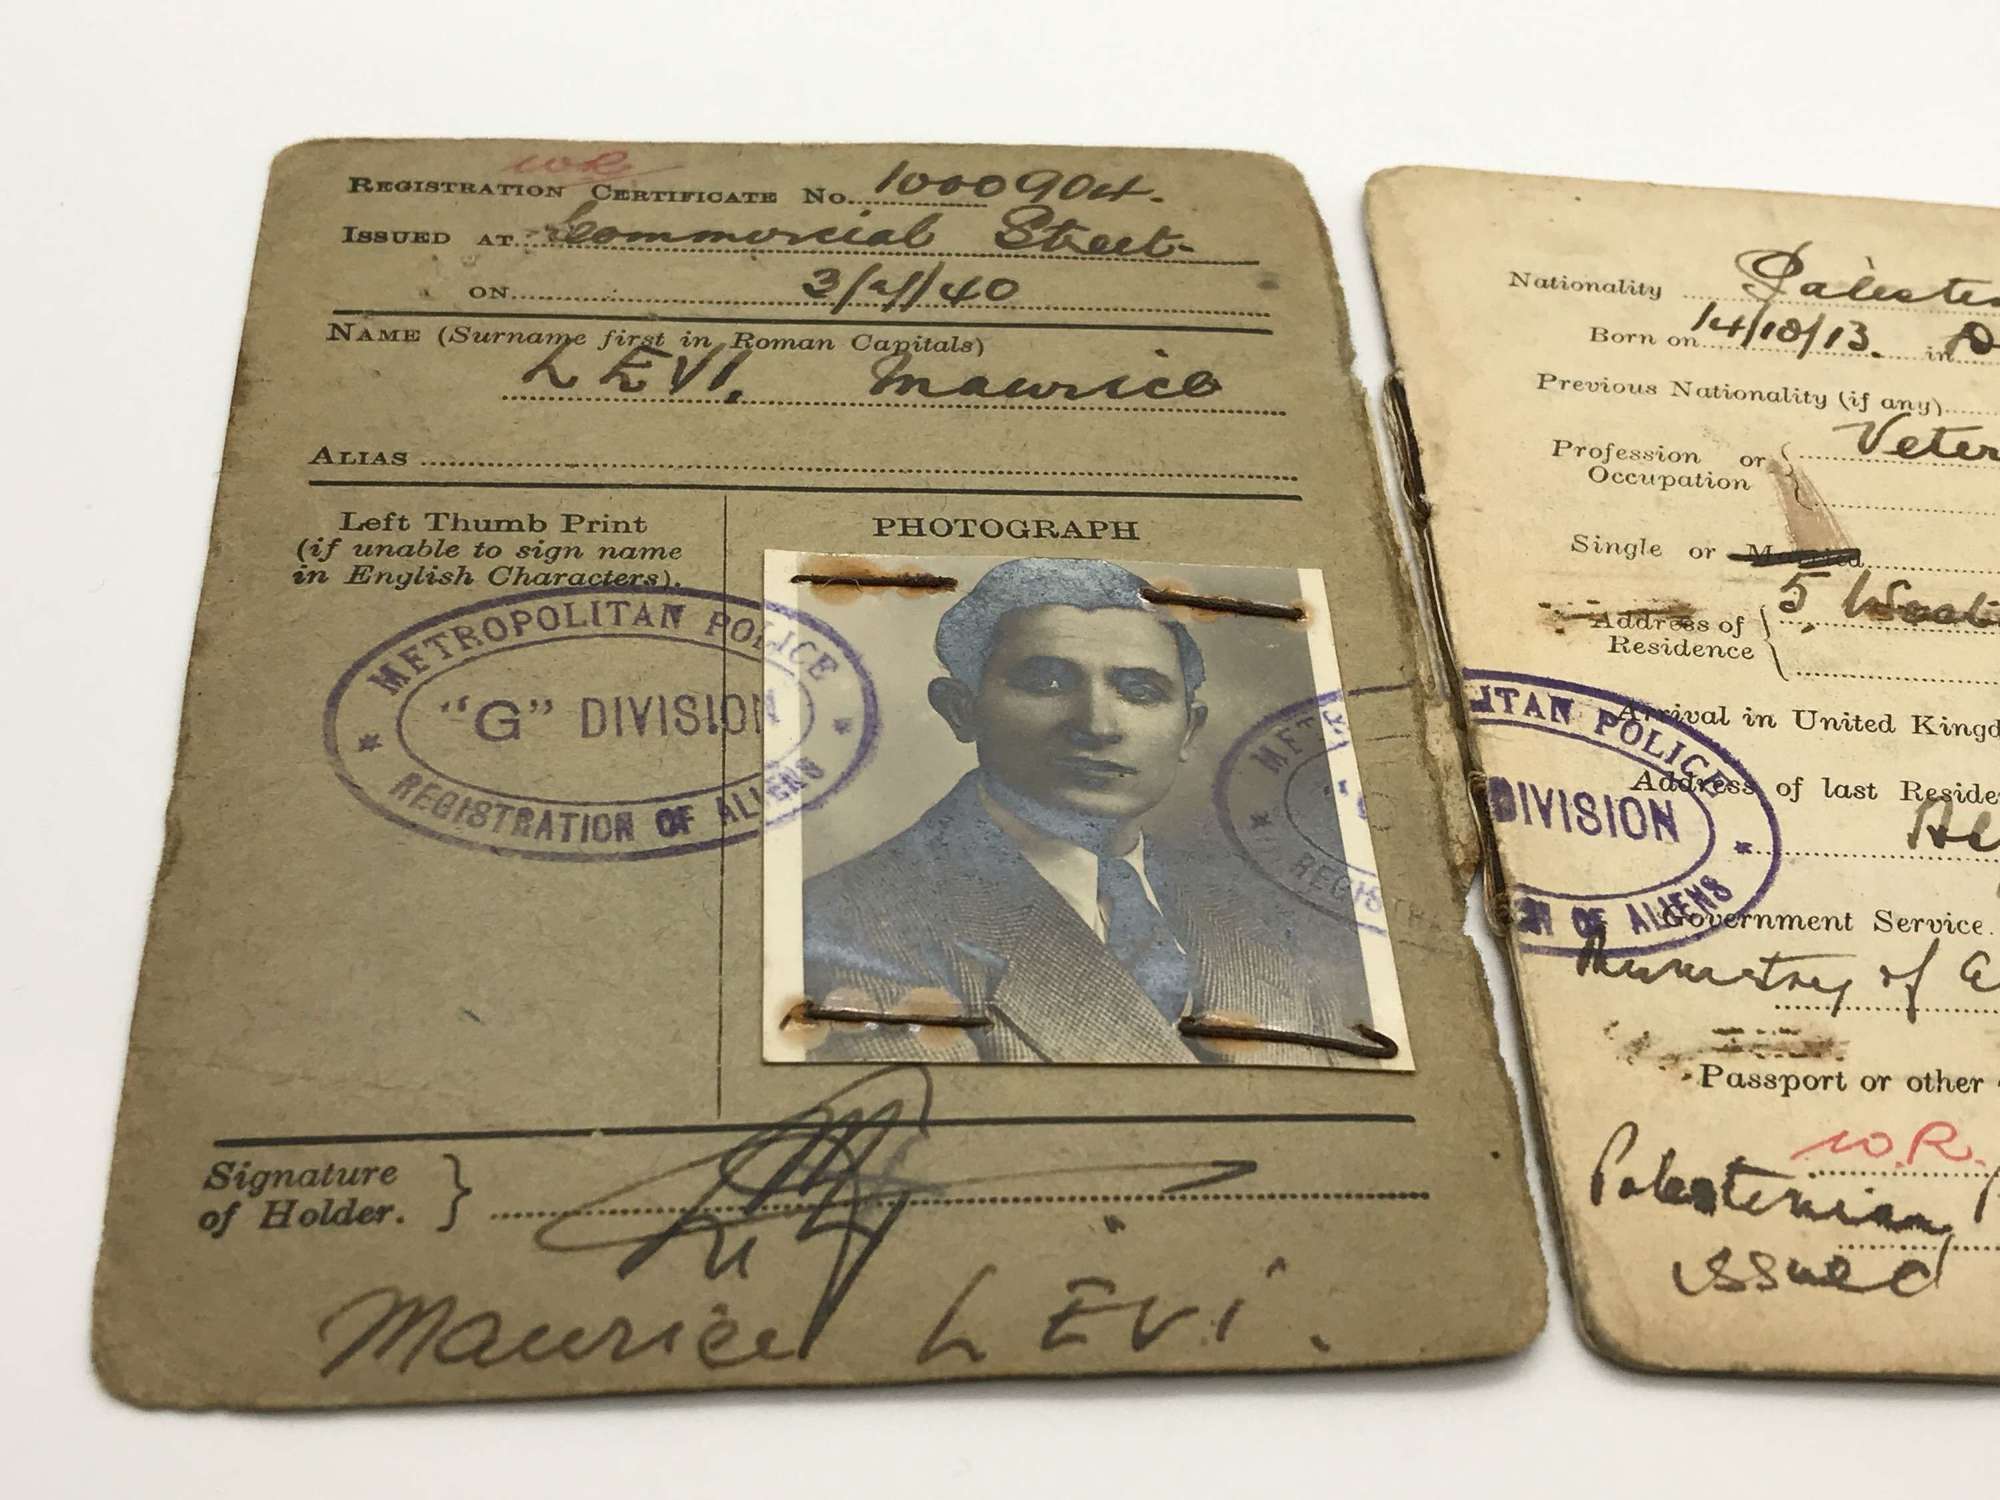 Certificate of registration of a Jewish refugee (veterinary surgeon)